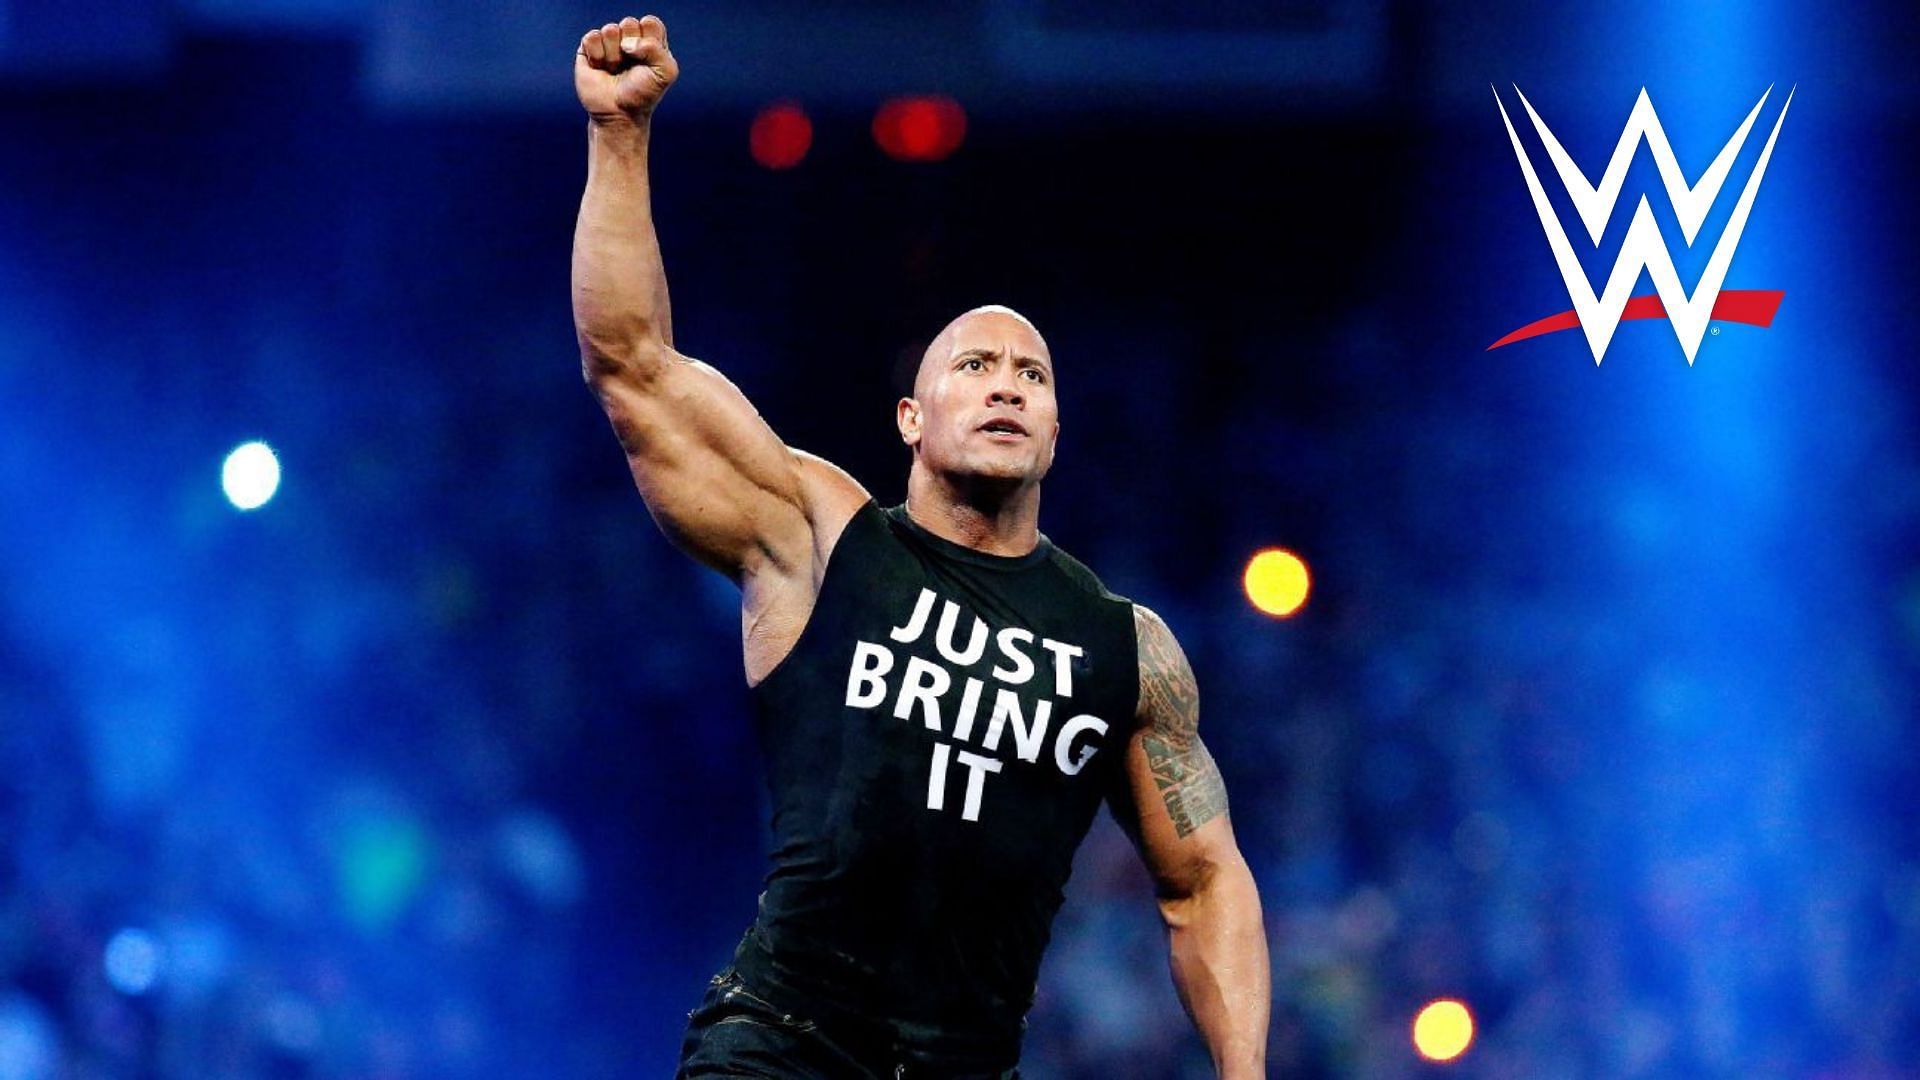 The Rock is an eight-time WWE Champion